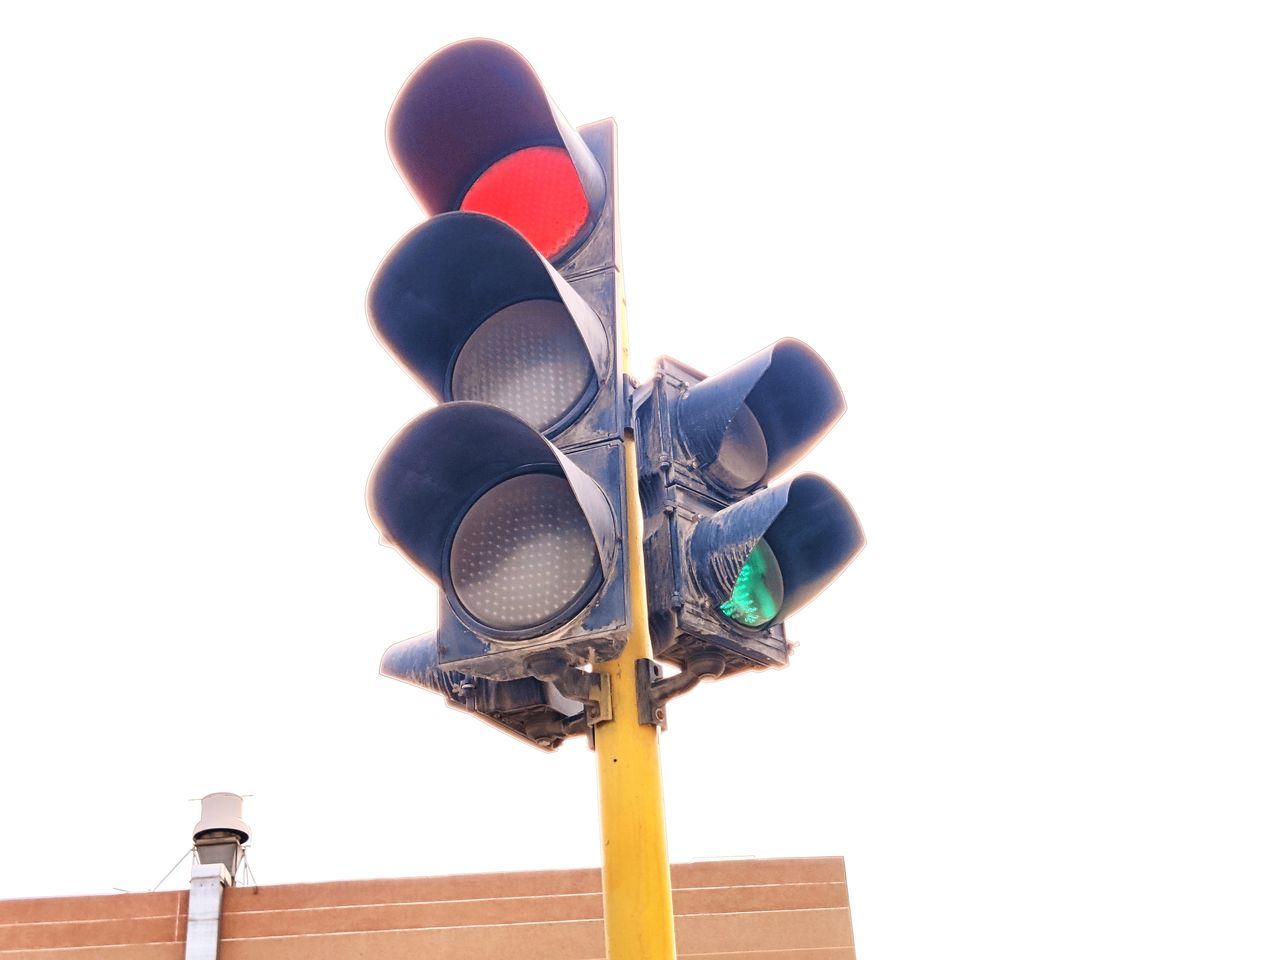 LOW ANGLE VIEW OF ROAD SIGNAL AGAINST SKY